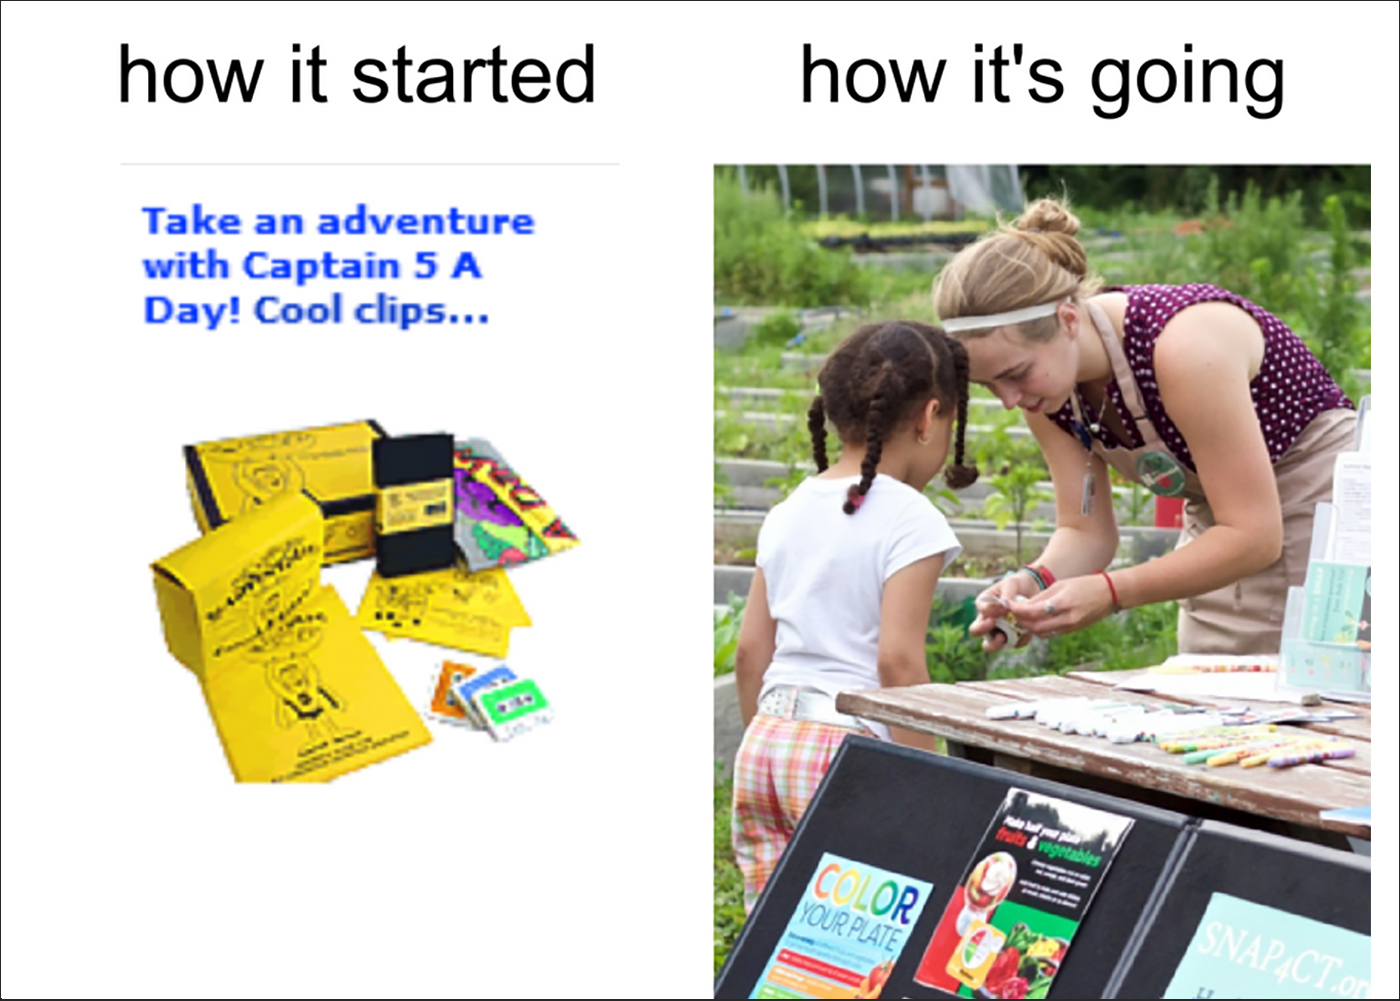 how it started, take an adventure with Captain 5 A Day! Cool clips....with an image of an early teaching kit; how it's going with an educator teaching a child